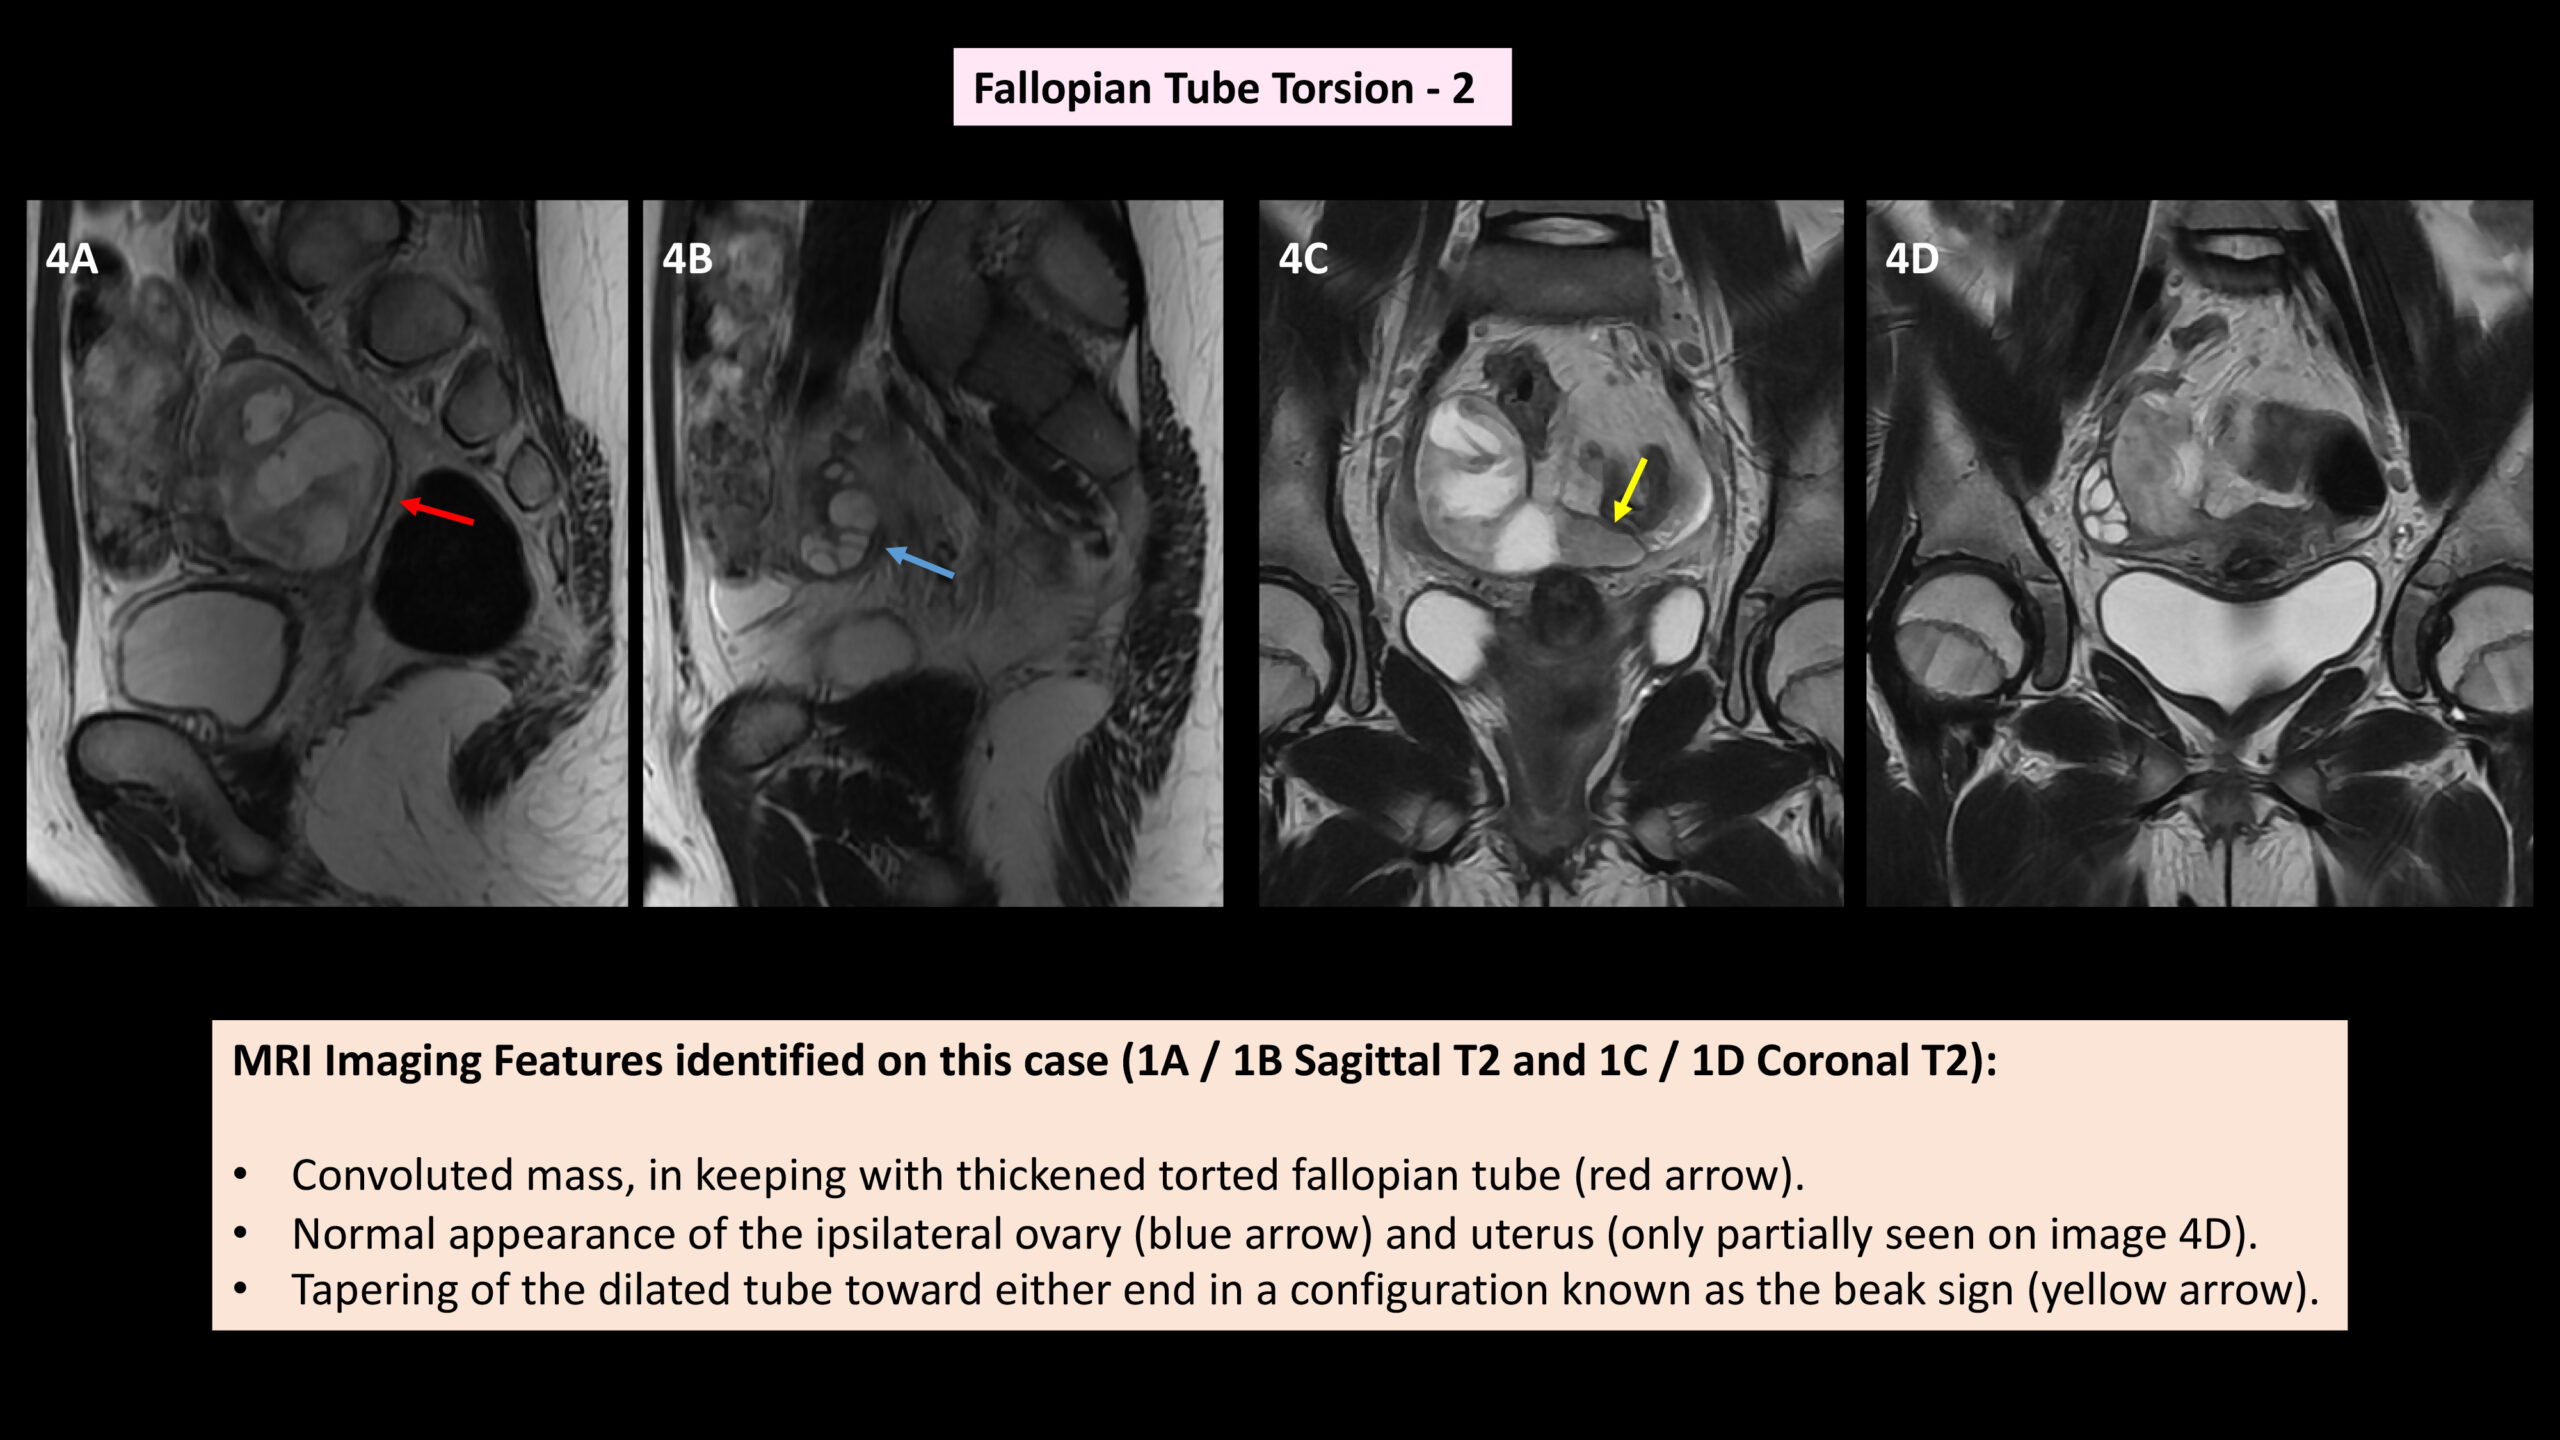 Untangling the Mystery: Radiological Insights into Female Pelvic Organ Torsion